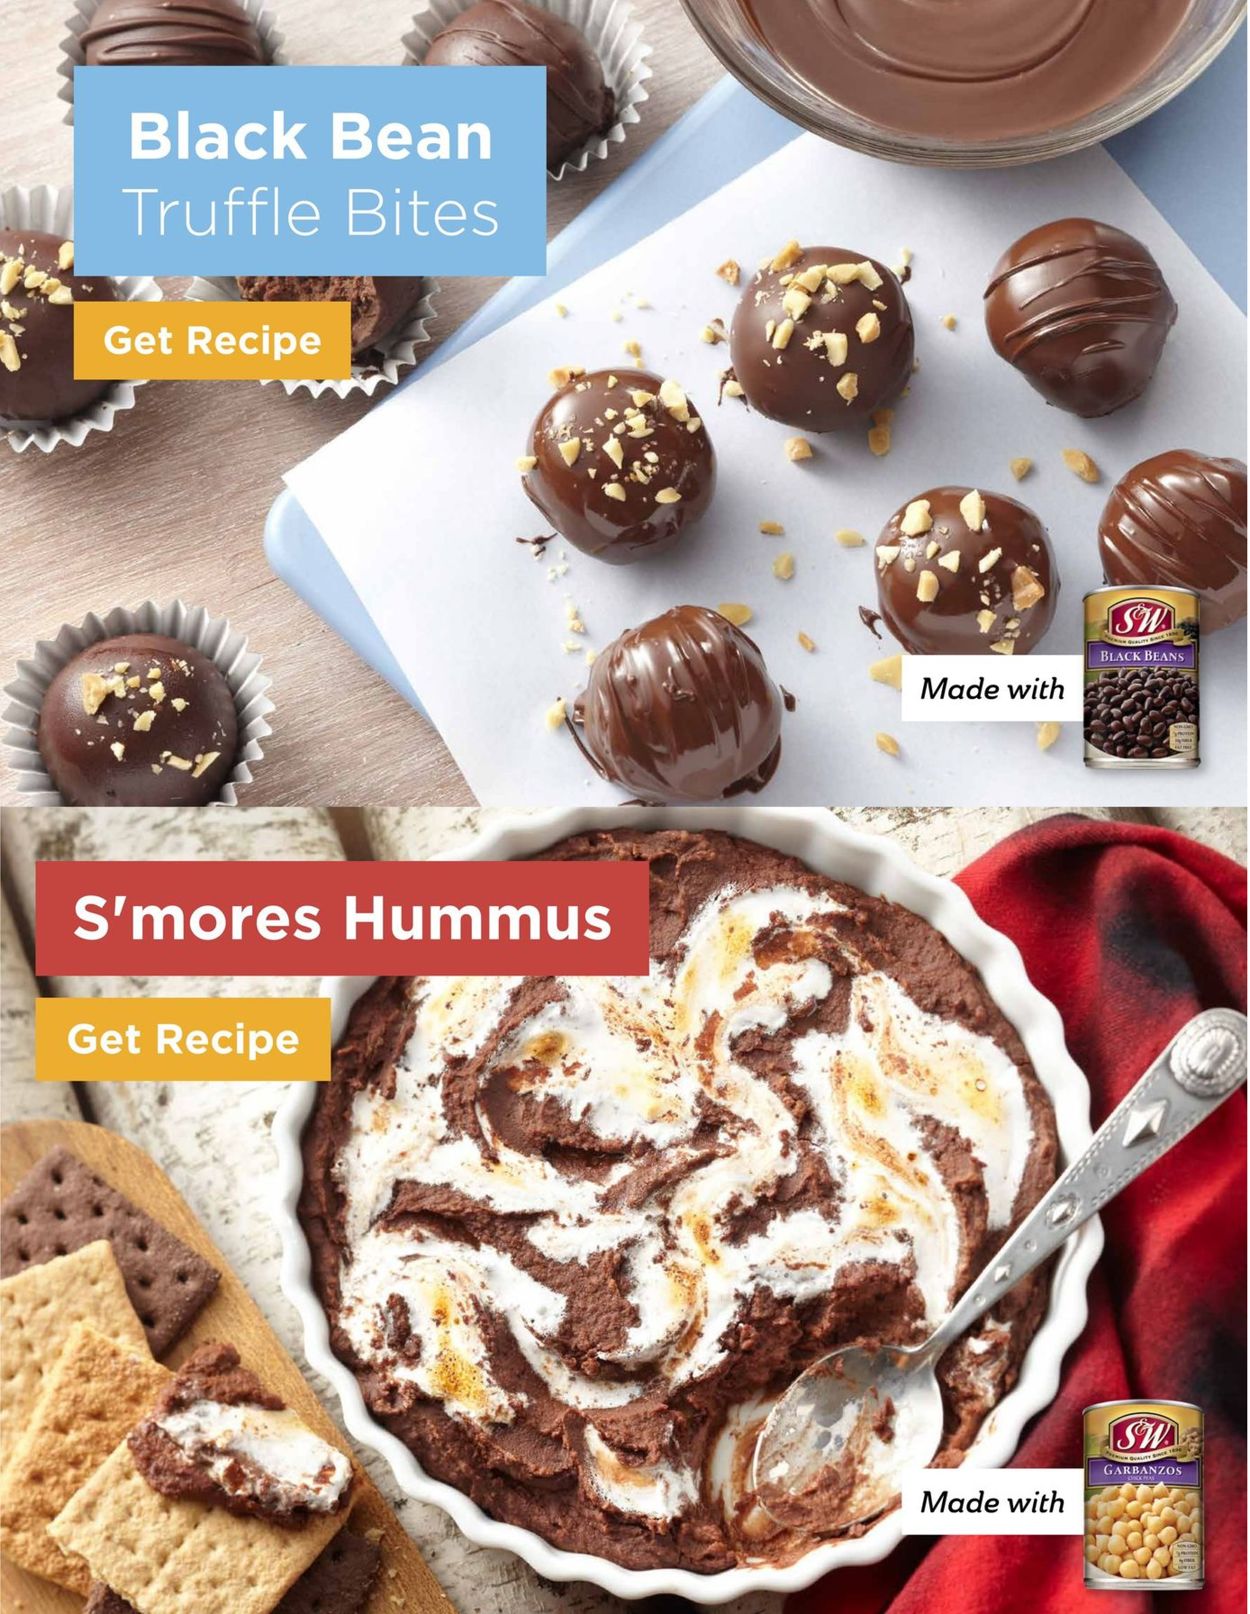 Cub Foods Ad from 12/19/2021